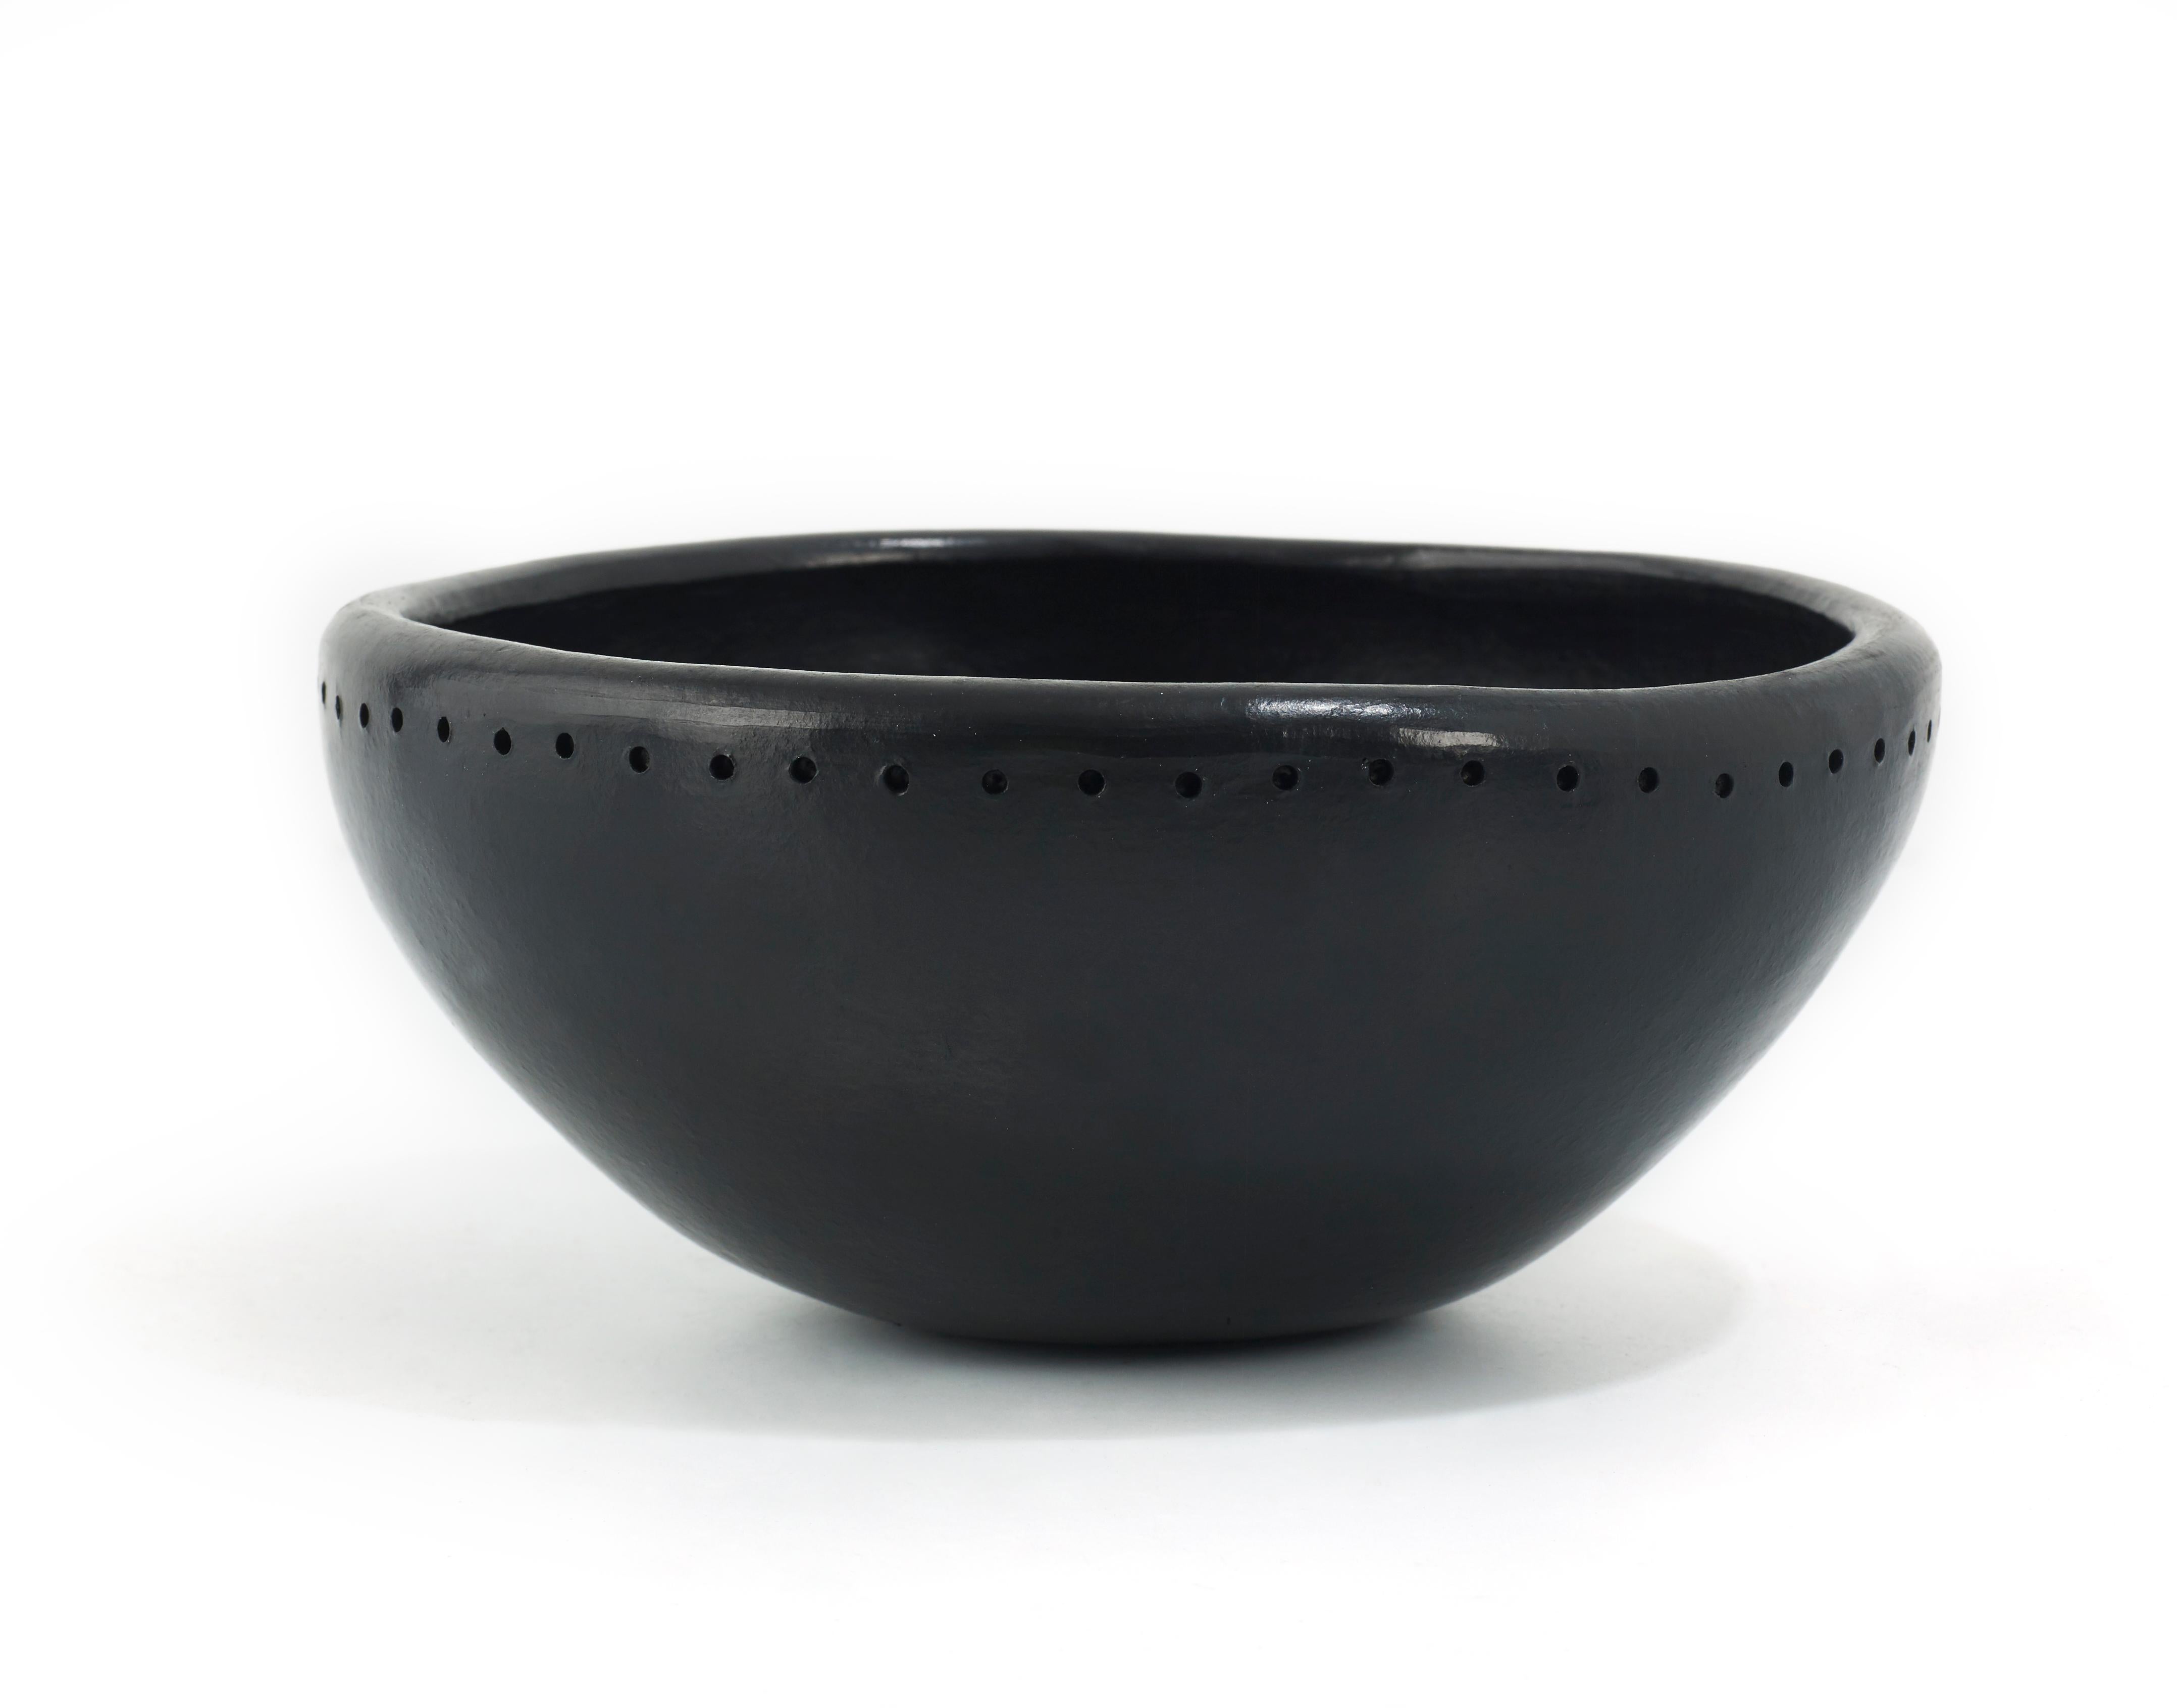 X small bowl Barro dining by Sebastian Herkner
Materials: heat-resistant Black ceramic. 
Technique: glazed. Oven cooked and polished with semi-precious stones. 
Dimensions: diameter 16.5 cm x height 8 cm 
Available in sizes: Large, Medium, and